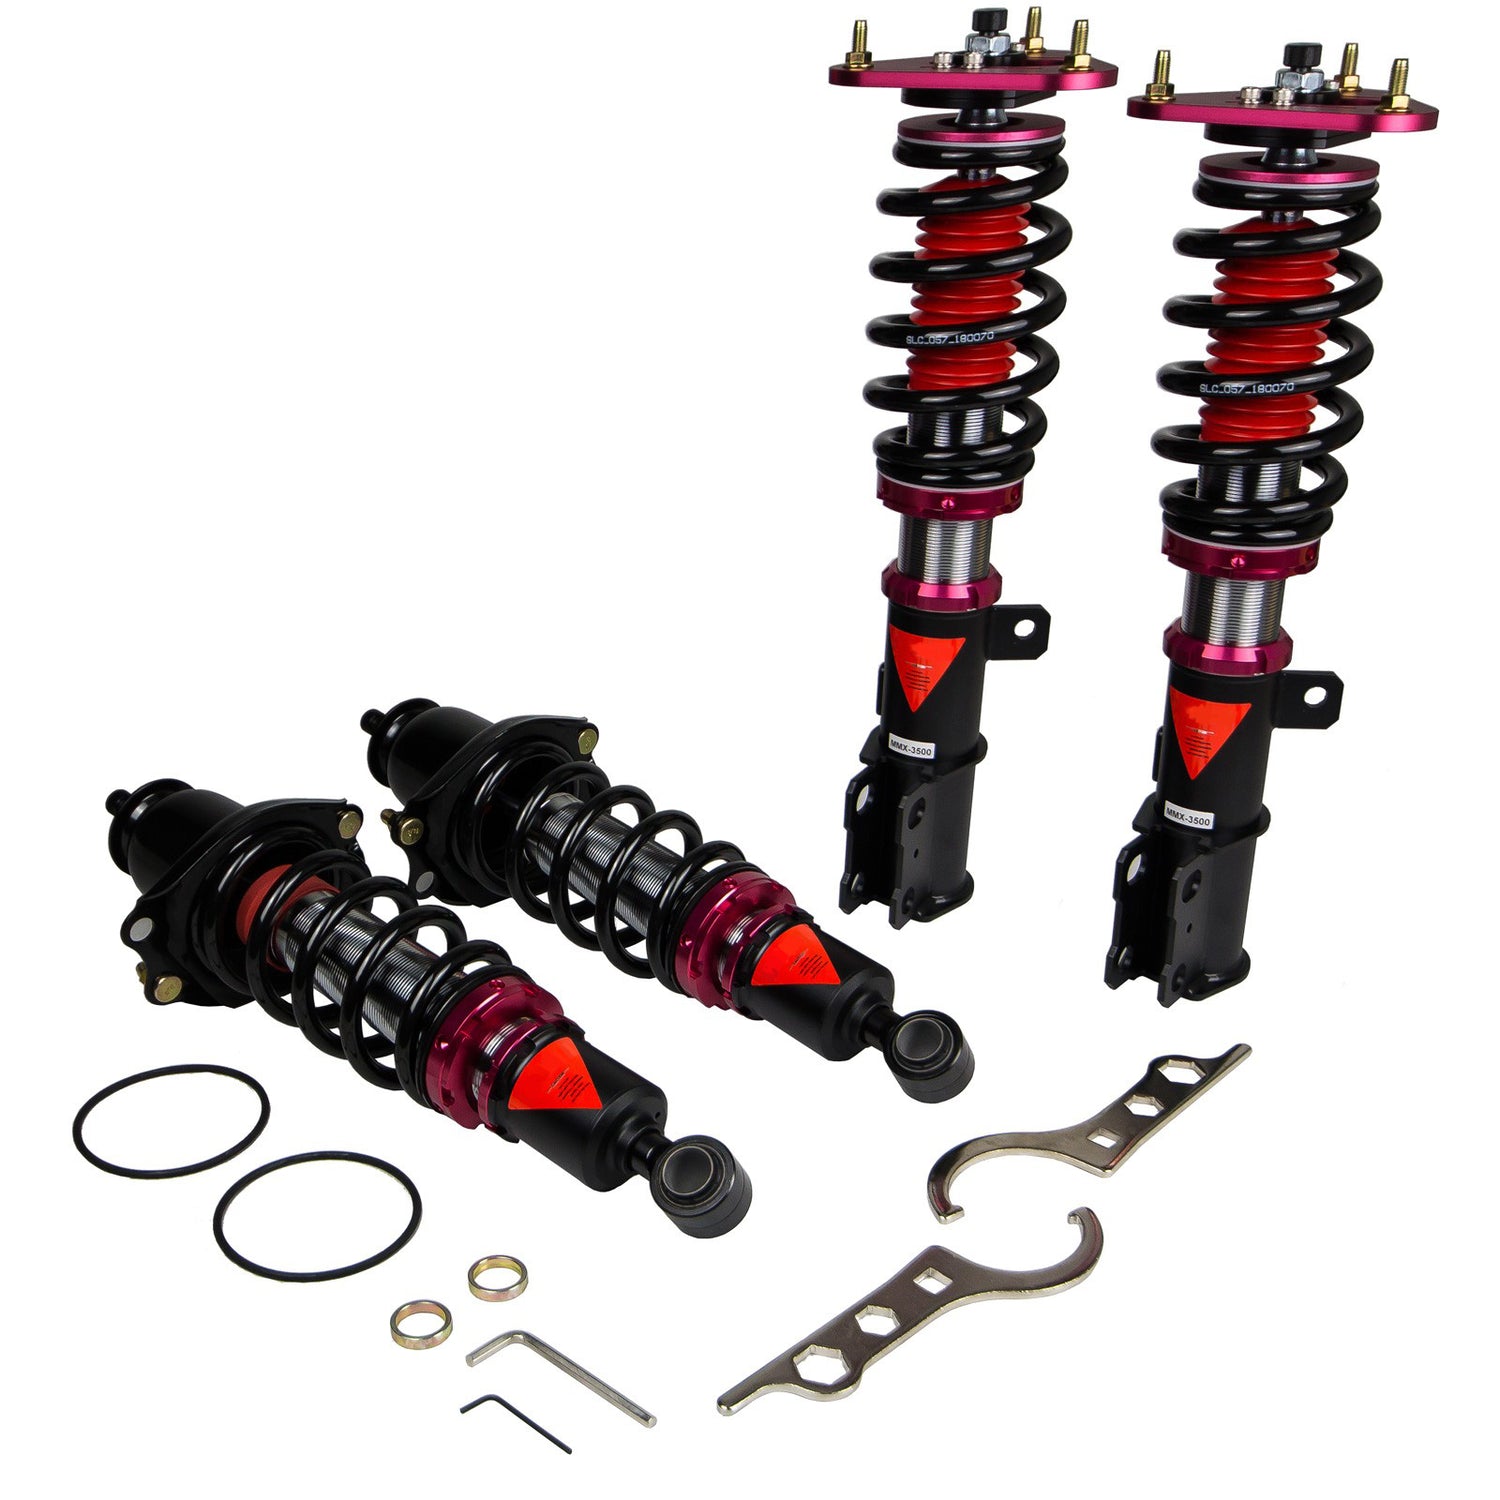 MMX3480-A MAXX Coilovers Lowering Kit, Fully Adjustable, Ride Height, 40 Clicks Rebound Settings, Toyota Corolla(E120/E130) 03-08